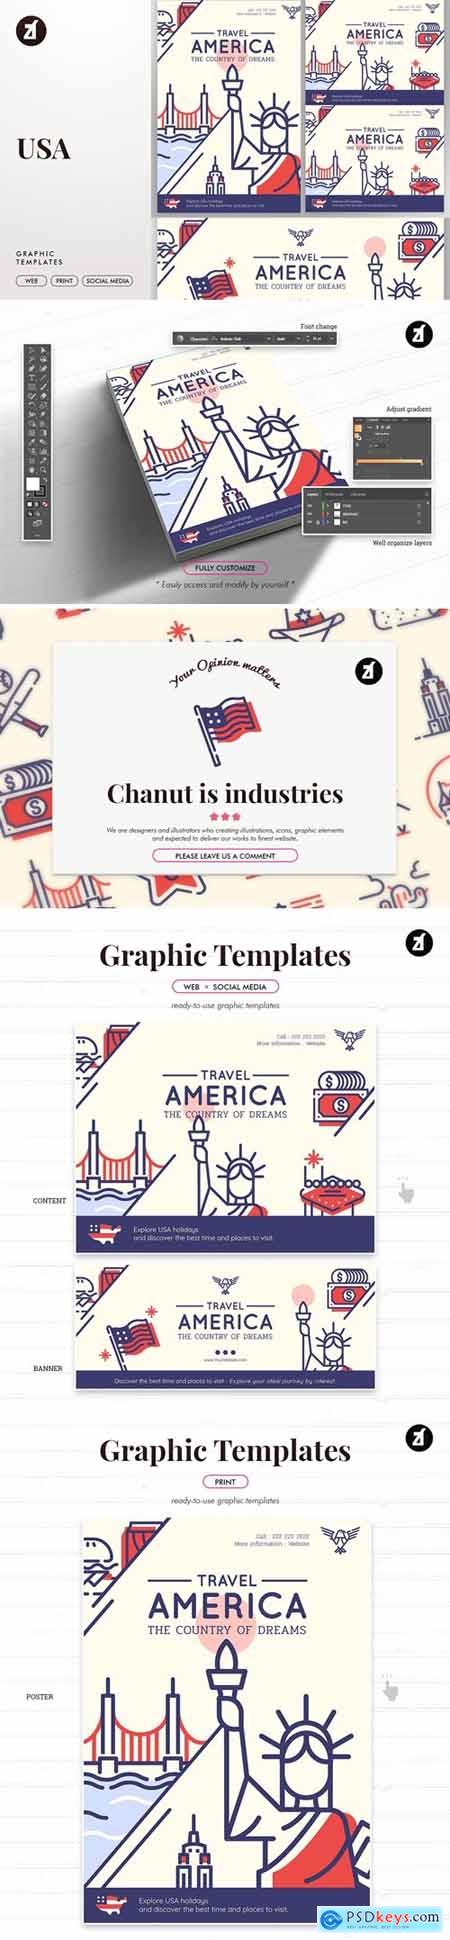 United states of America graphic templates